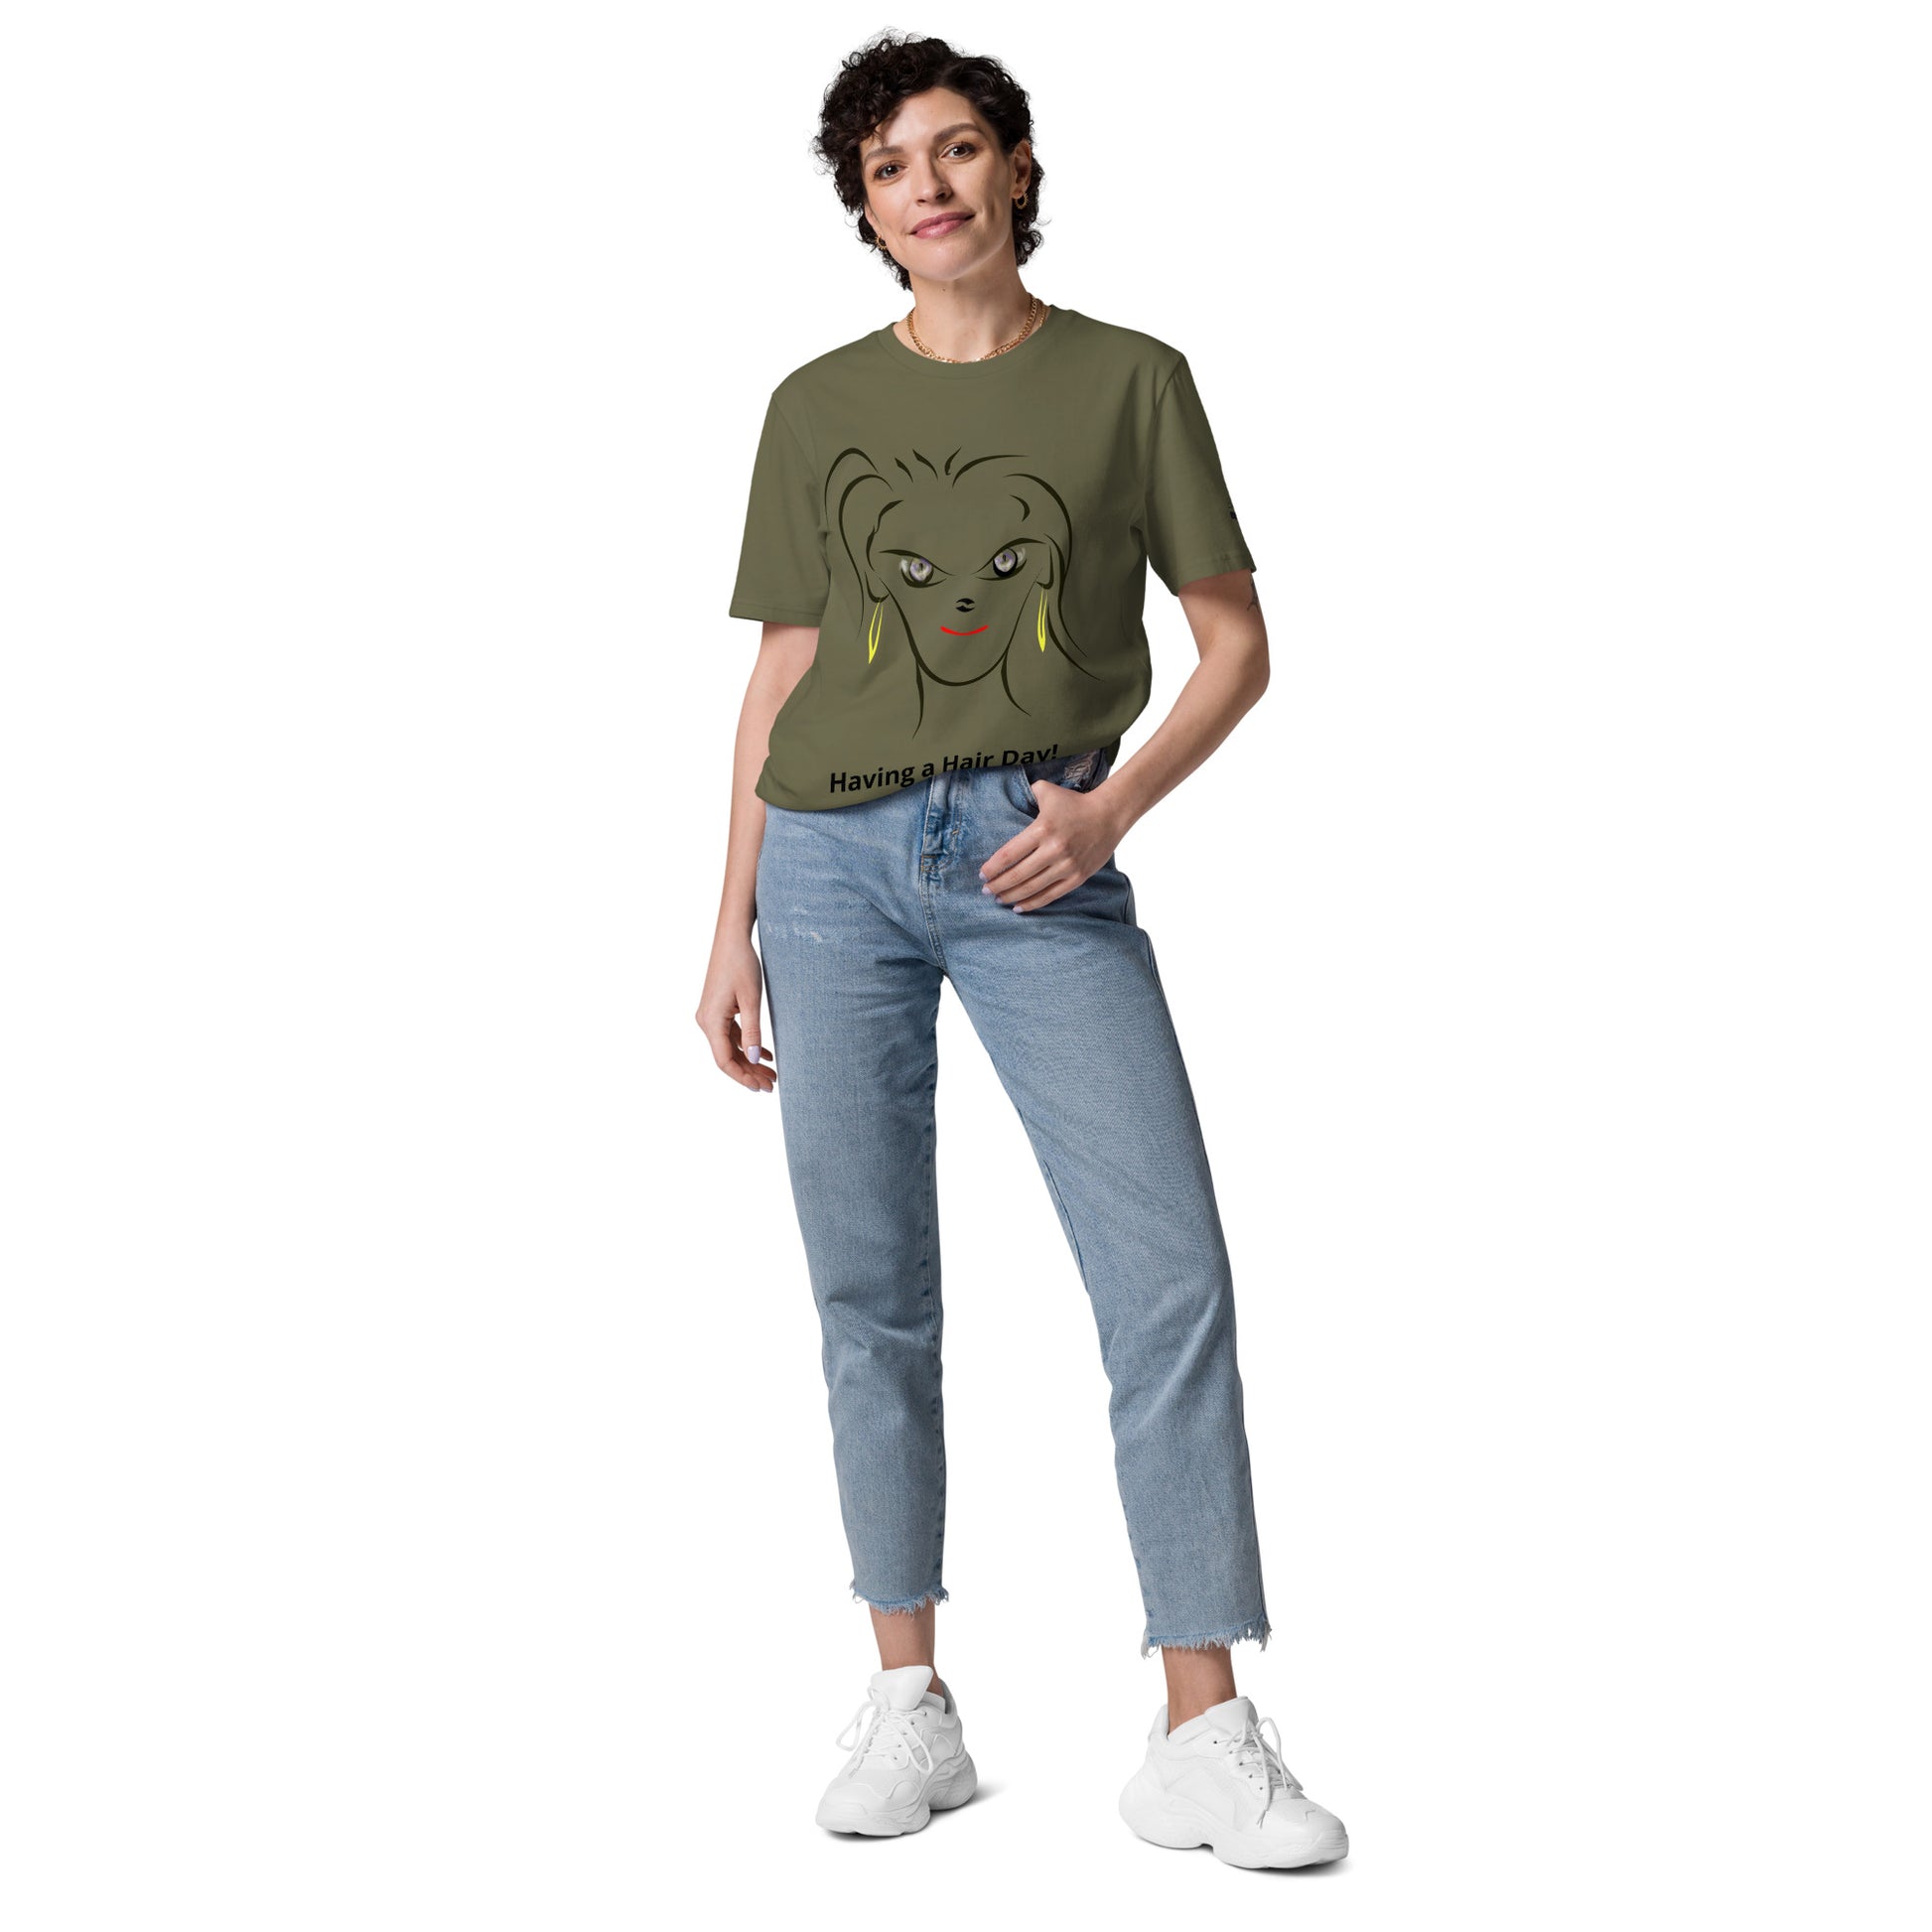 Embrace your individuality and add some fun to your wardrobe with the "Having a Hair Day!" BeSculpt Unisex Organic Cotton T-shirt – because sometimes, it's okay to embrace the chaos and rock that messy hair with pride!